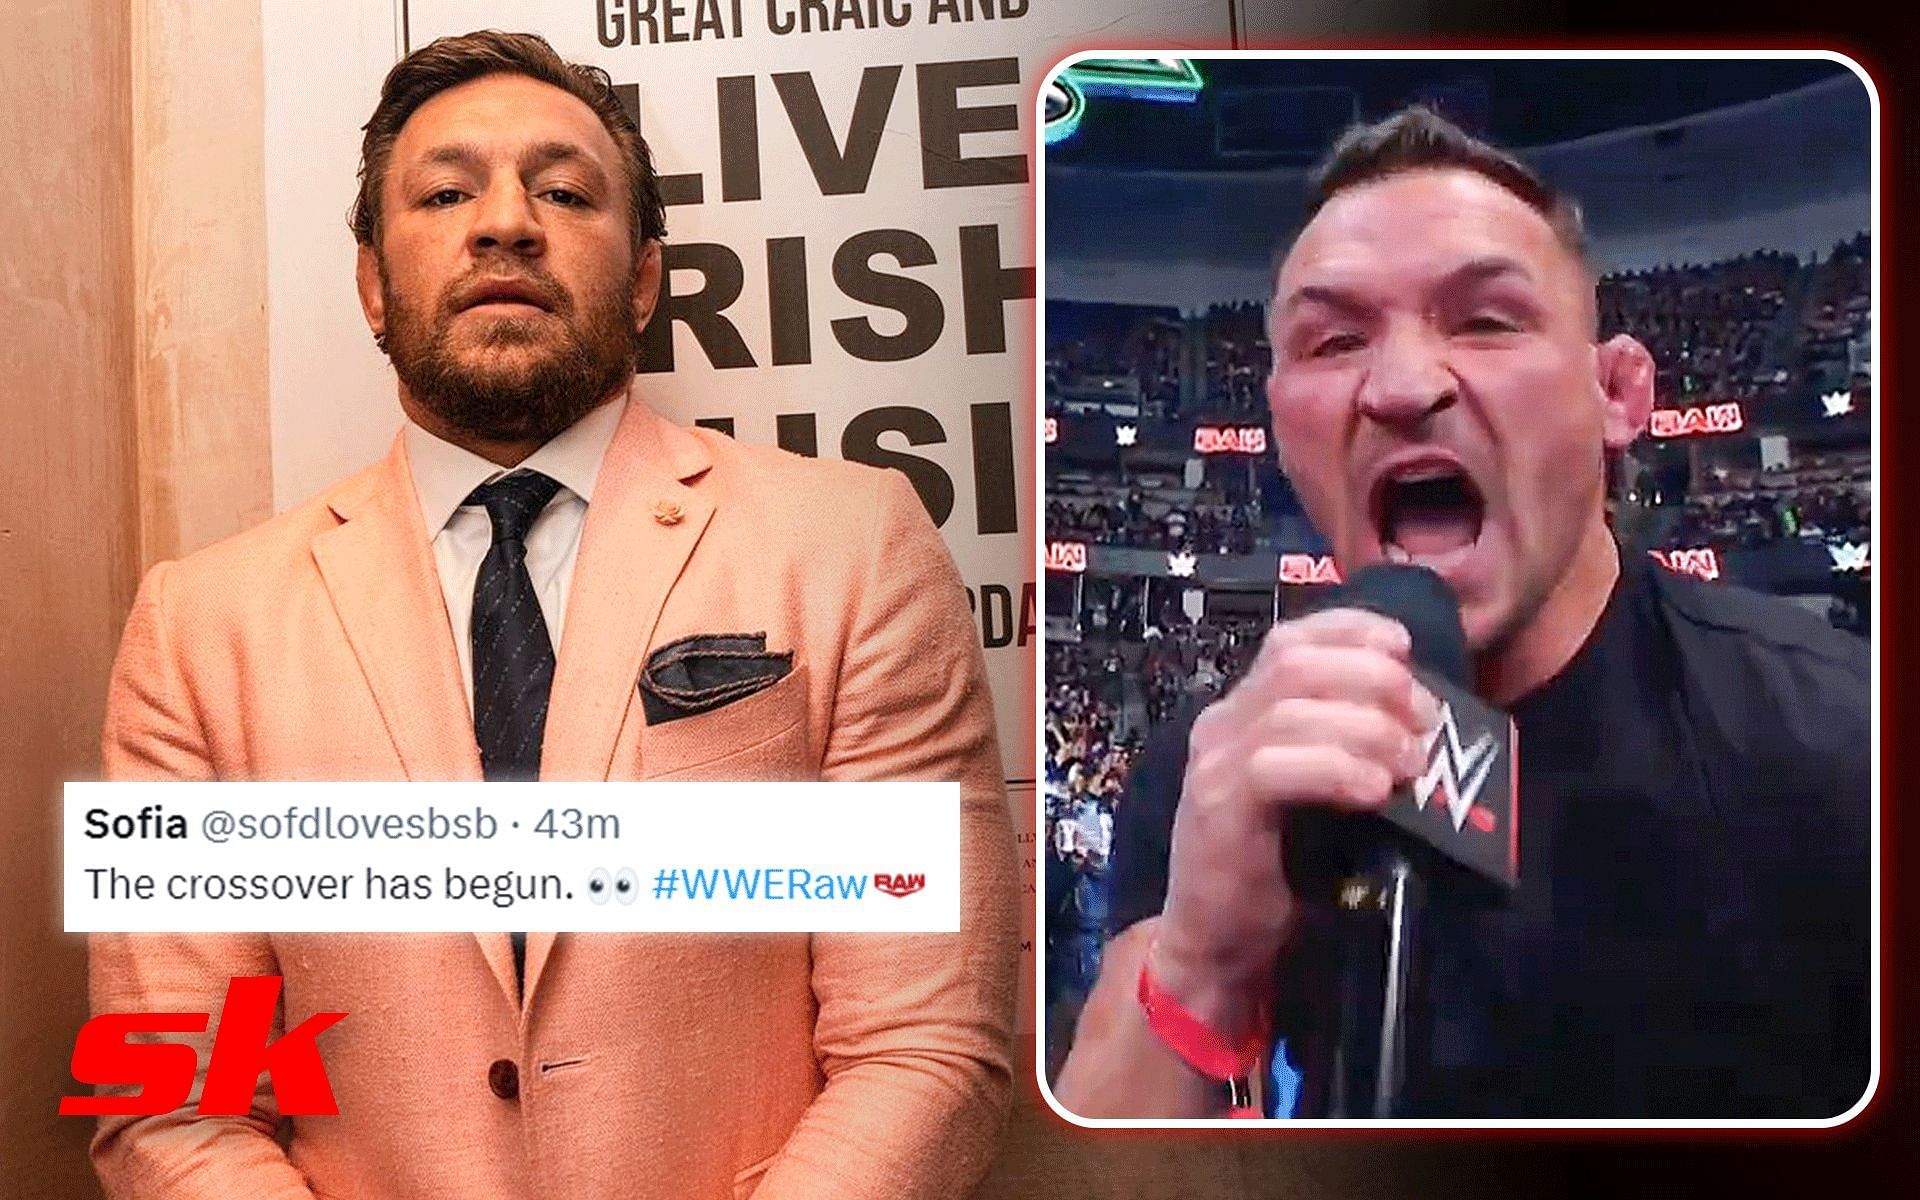 Fans react to Michael Chandler (right) calling out Conor McGregor (left) [Image via: @thenotoriousmma and @wwe on Instagram]